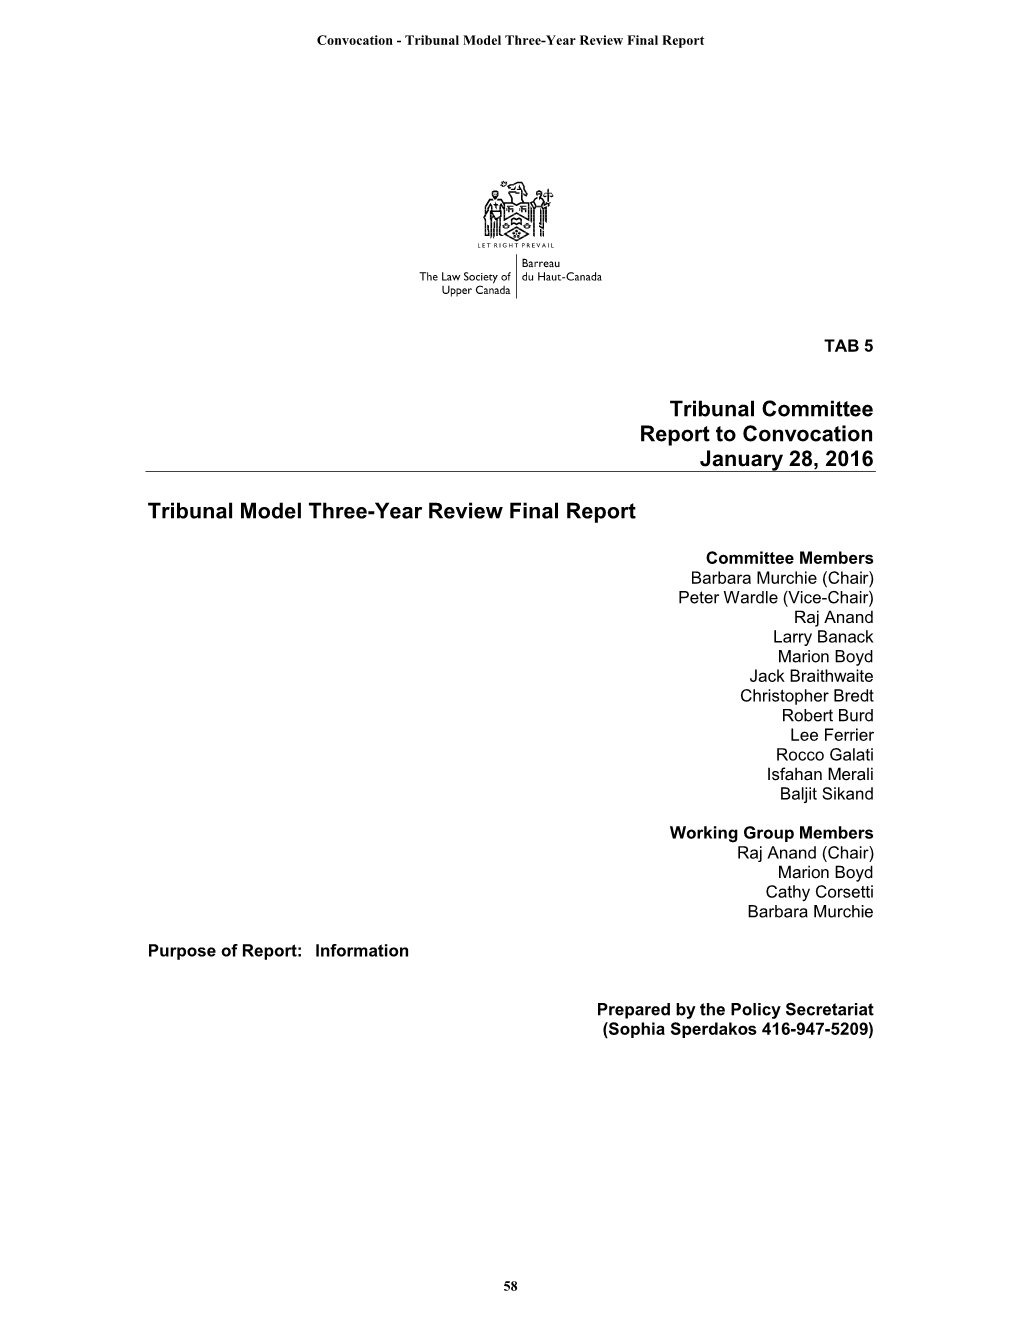 Tribunal Committee Report to Convocation January 28, 2016 Tribunal Model Three-Year Review Final Report